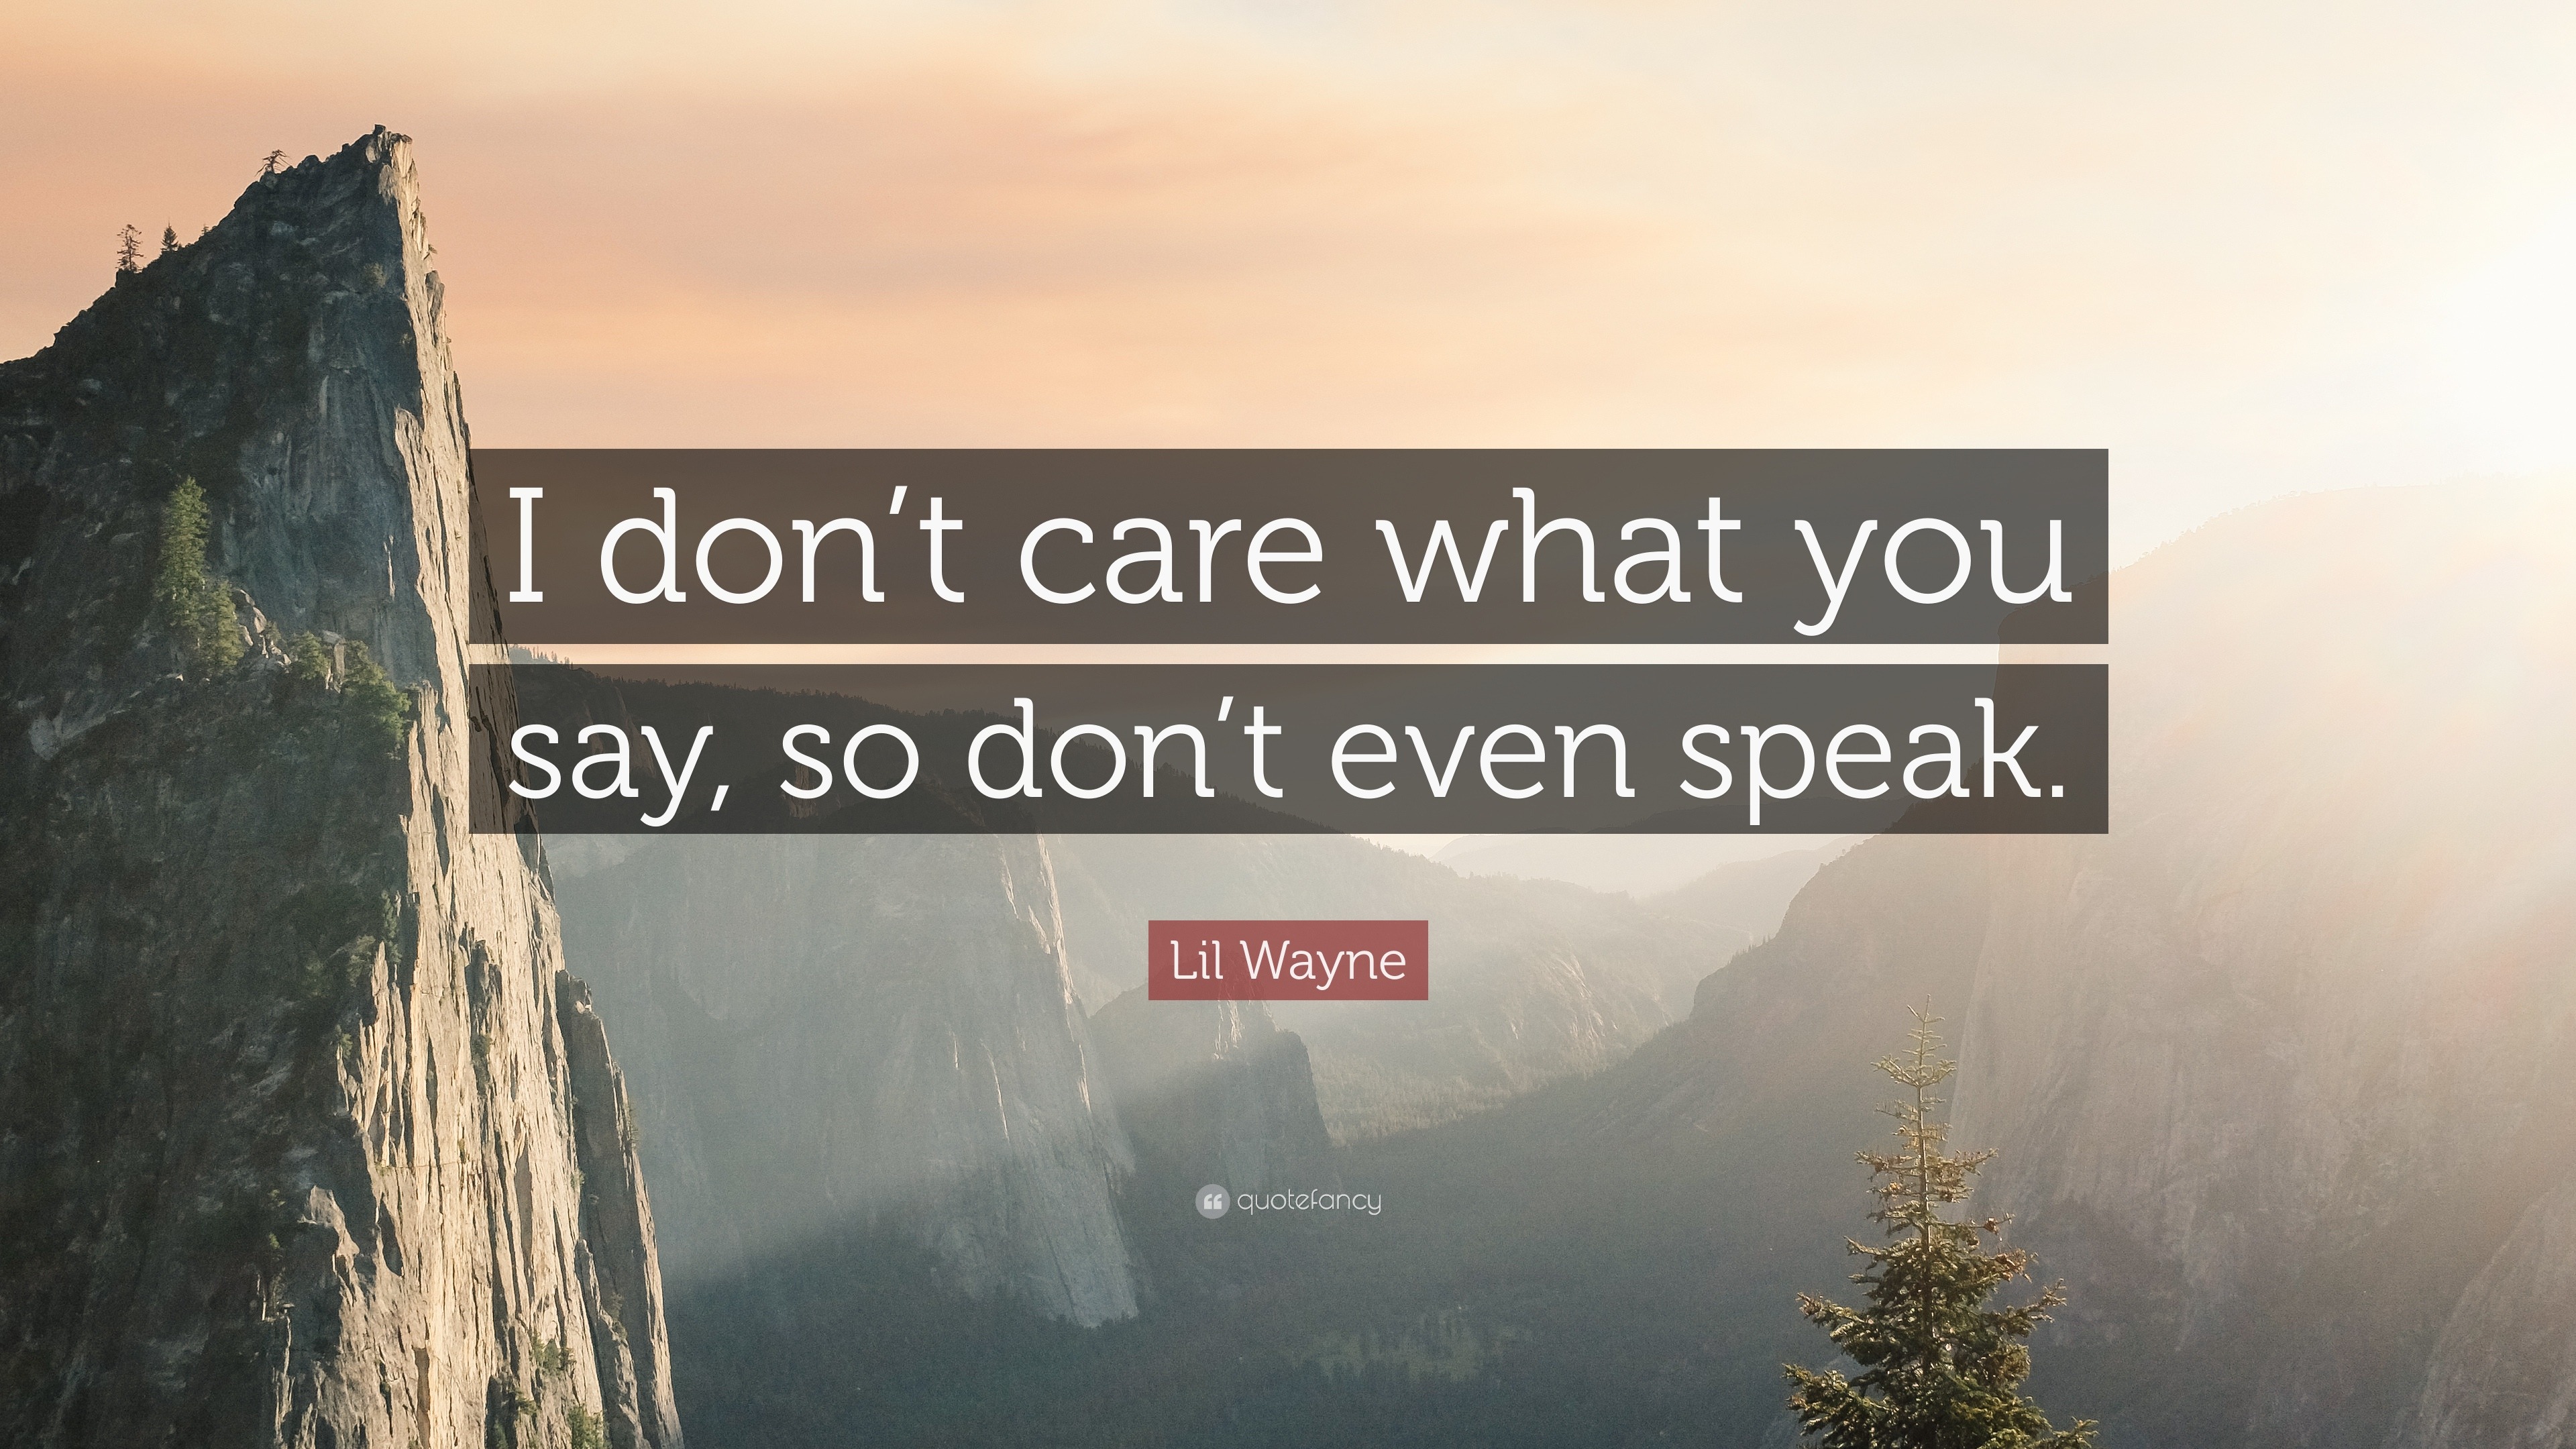 Lil Wayne Quote: “I don't care what you say, so don't even speak.”